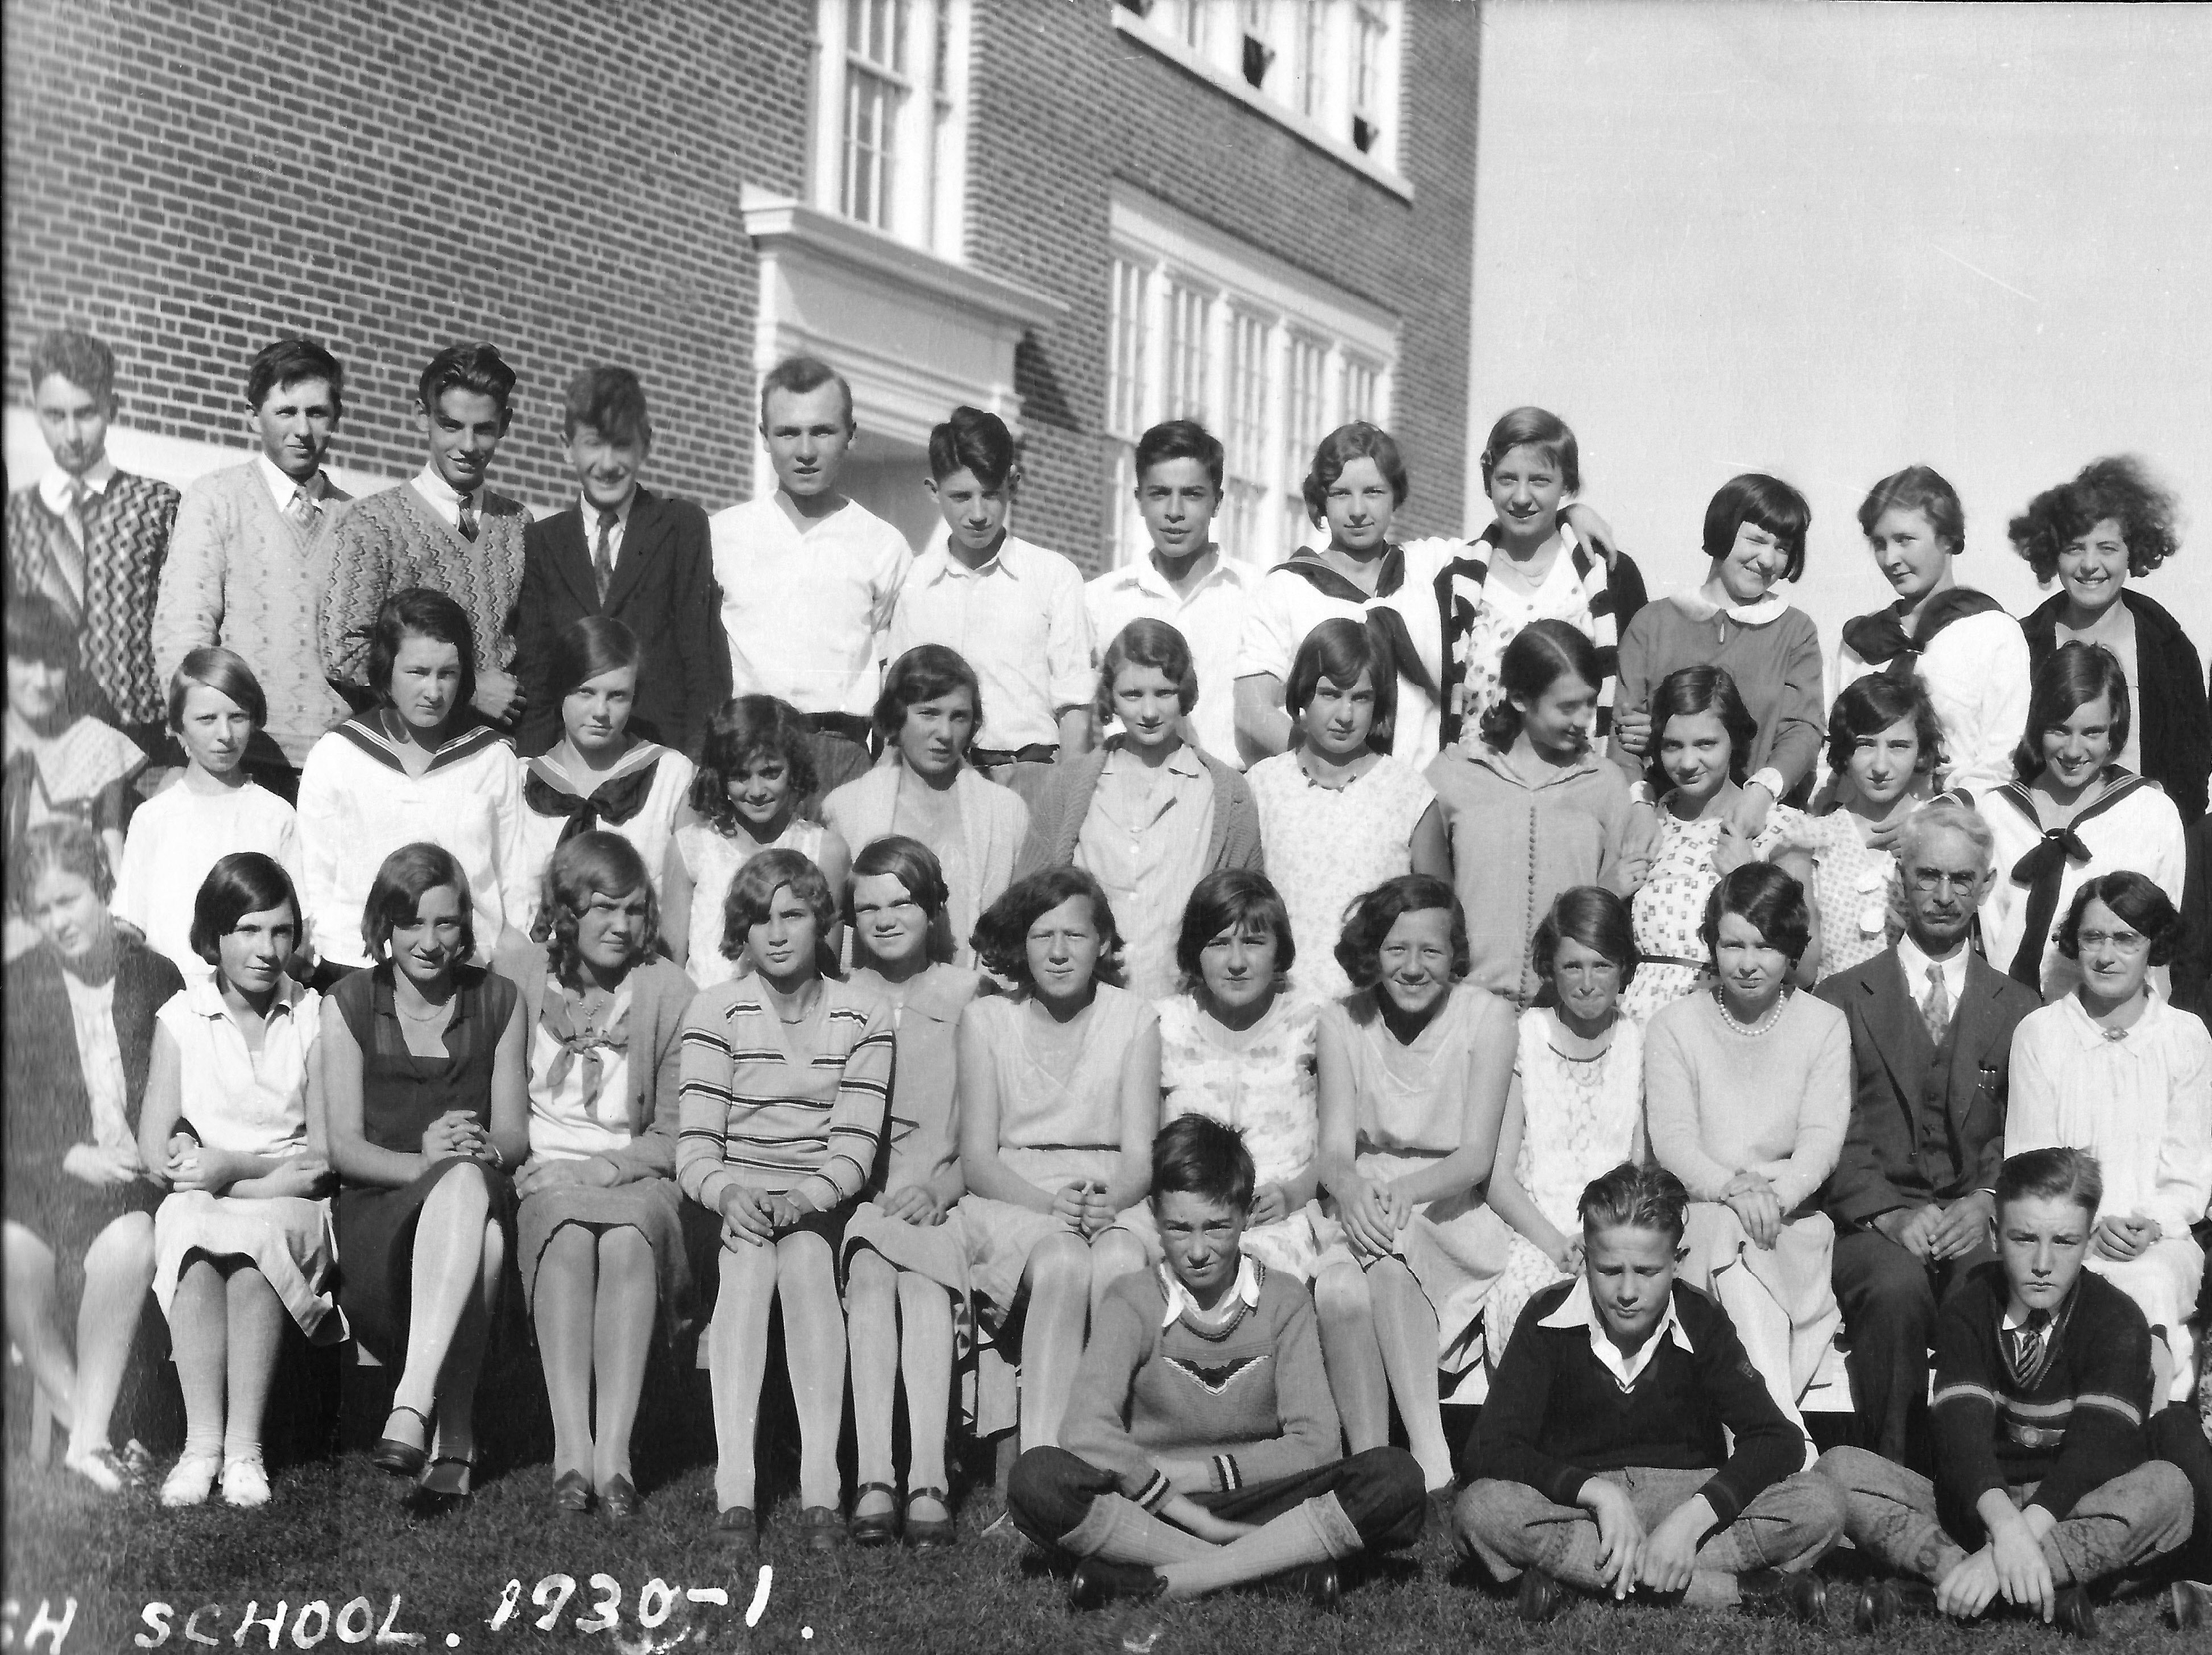 (Click to magnify - multiple levels of magnification) This photo has been heavily Photoshopped to remove visual artifacts) NOTE: the principal: J.E. Burchell, is near the right edge of the 2nd row.